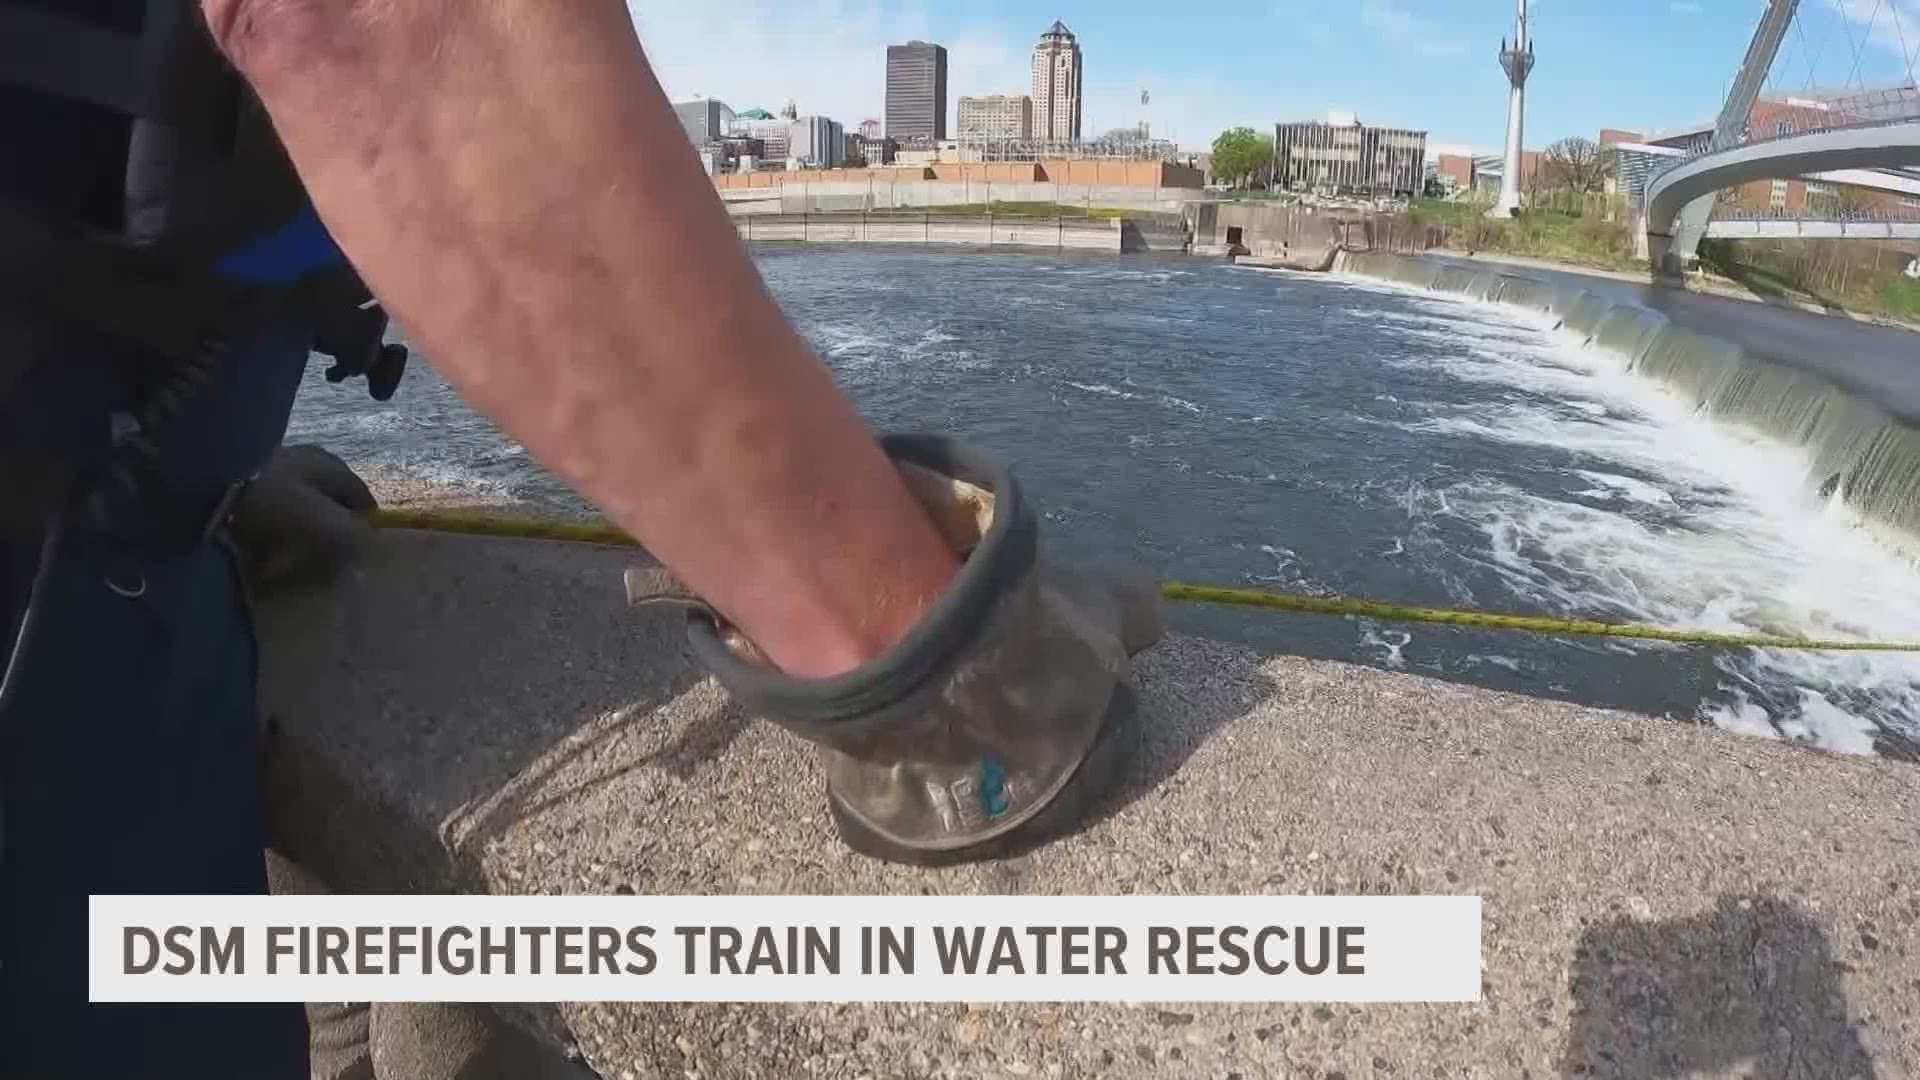 At least four bodies have been recovered from bodies of water in central Iowa this year. Local 5's Lakyn McGee shows how first responders train for these incidents.